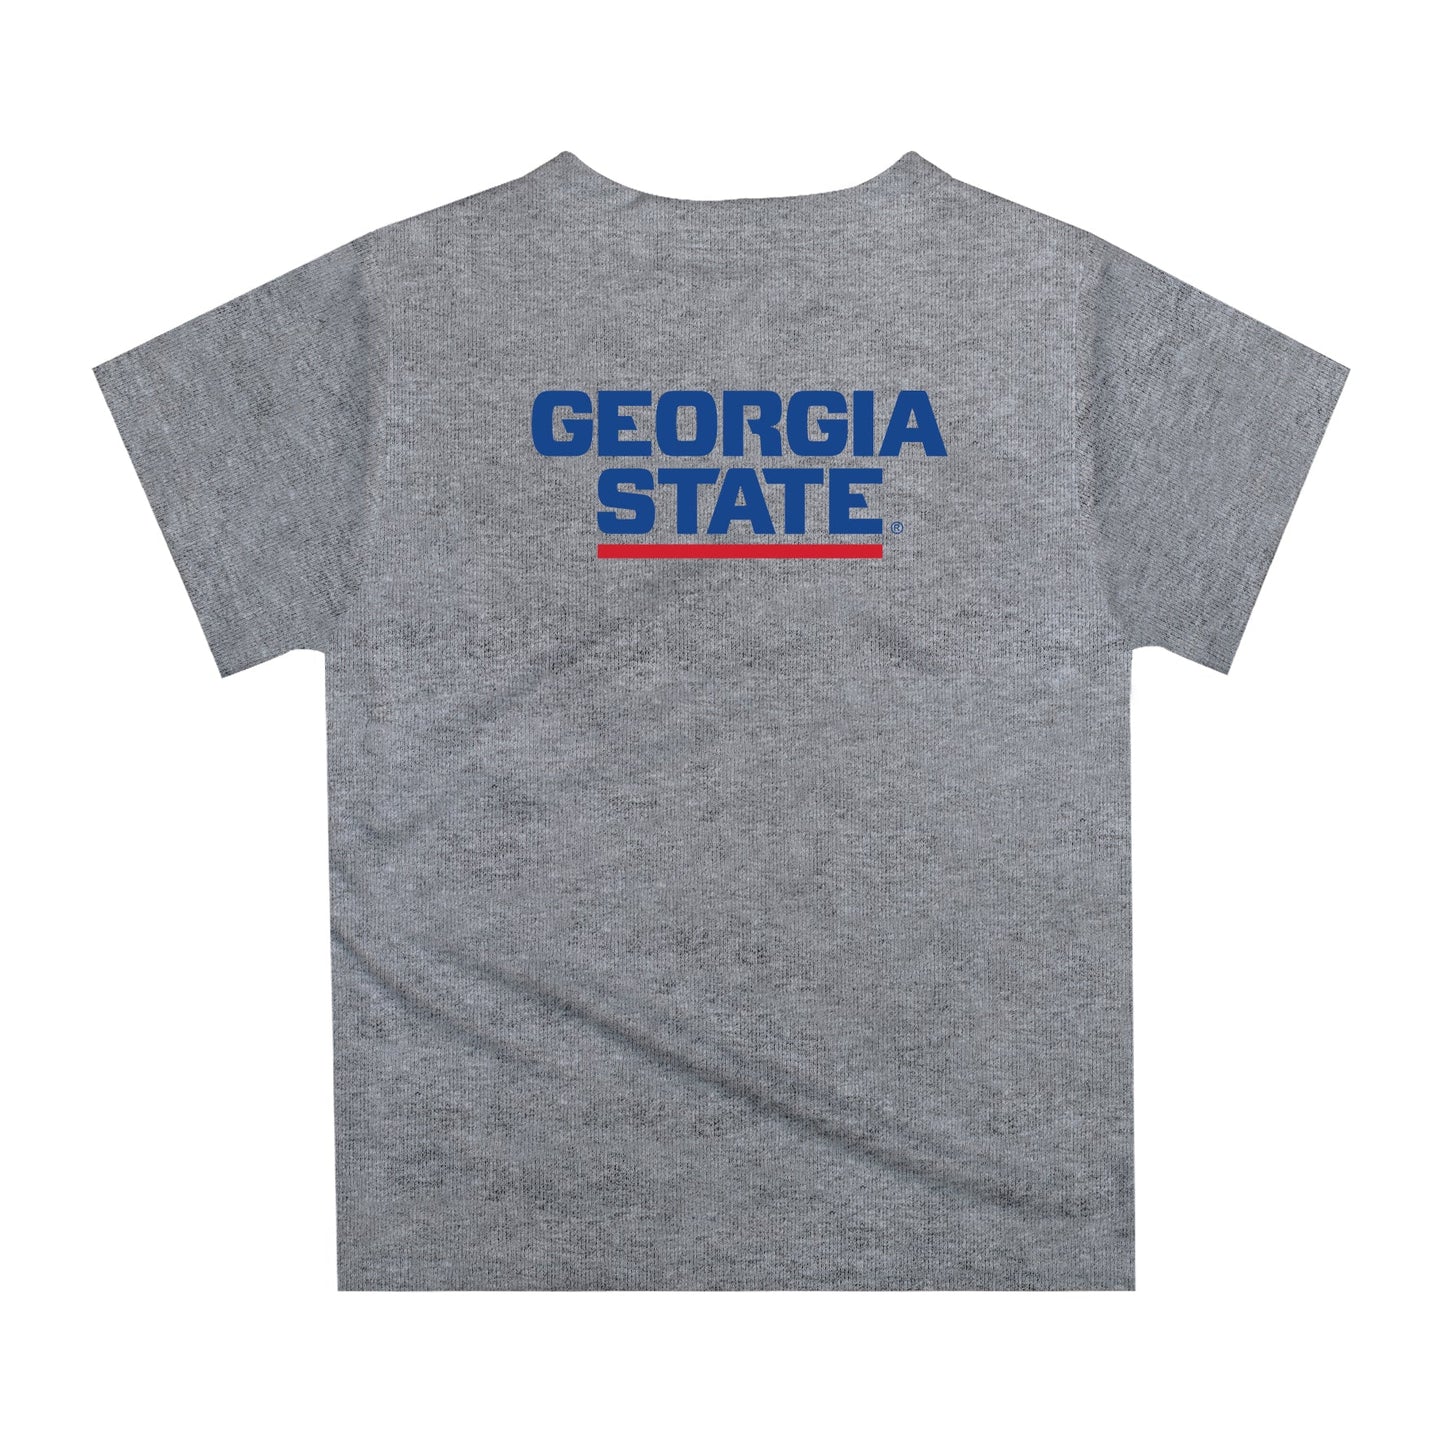 Georgia State Panthers Original Dripping Football Helmet Heather Gray T-Shirt by Vive La Fete